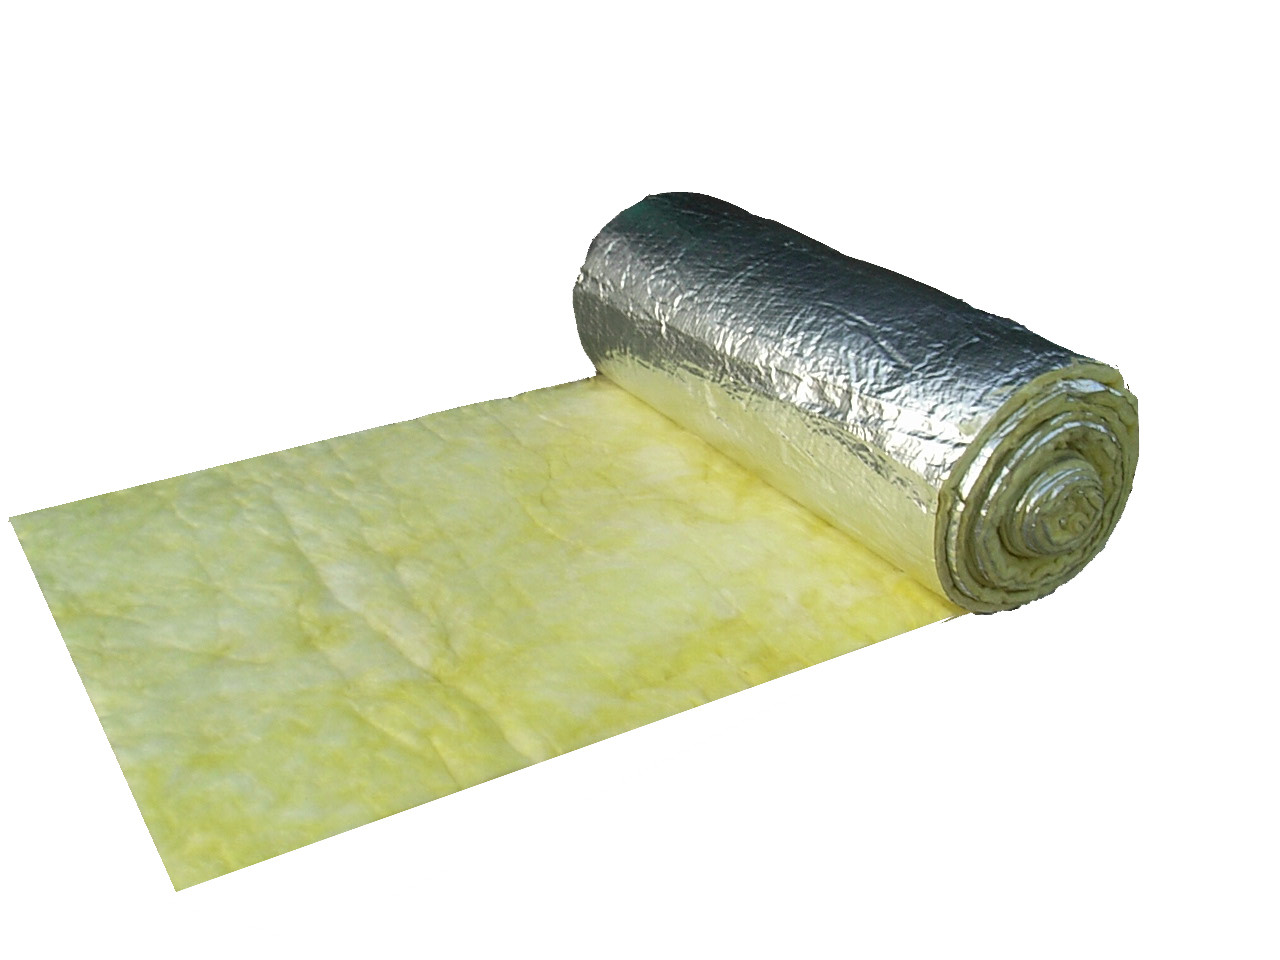 Buy cheap Sound Proofing FSK Glass Wool Blanket Insulation , Yellow Fiberglass Blanket product